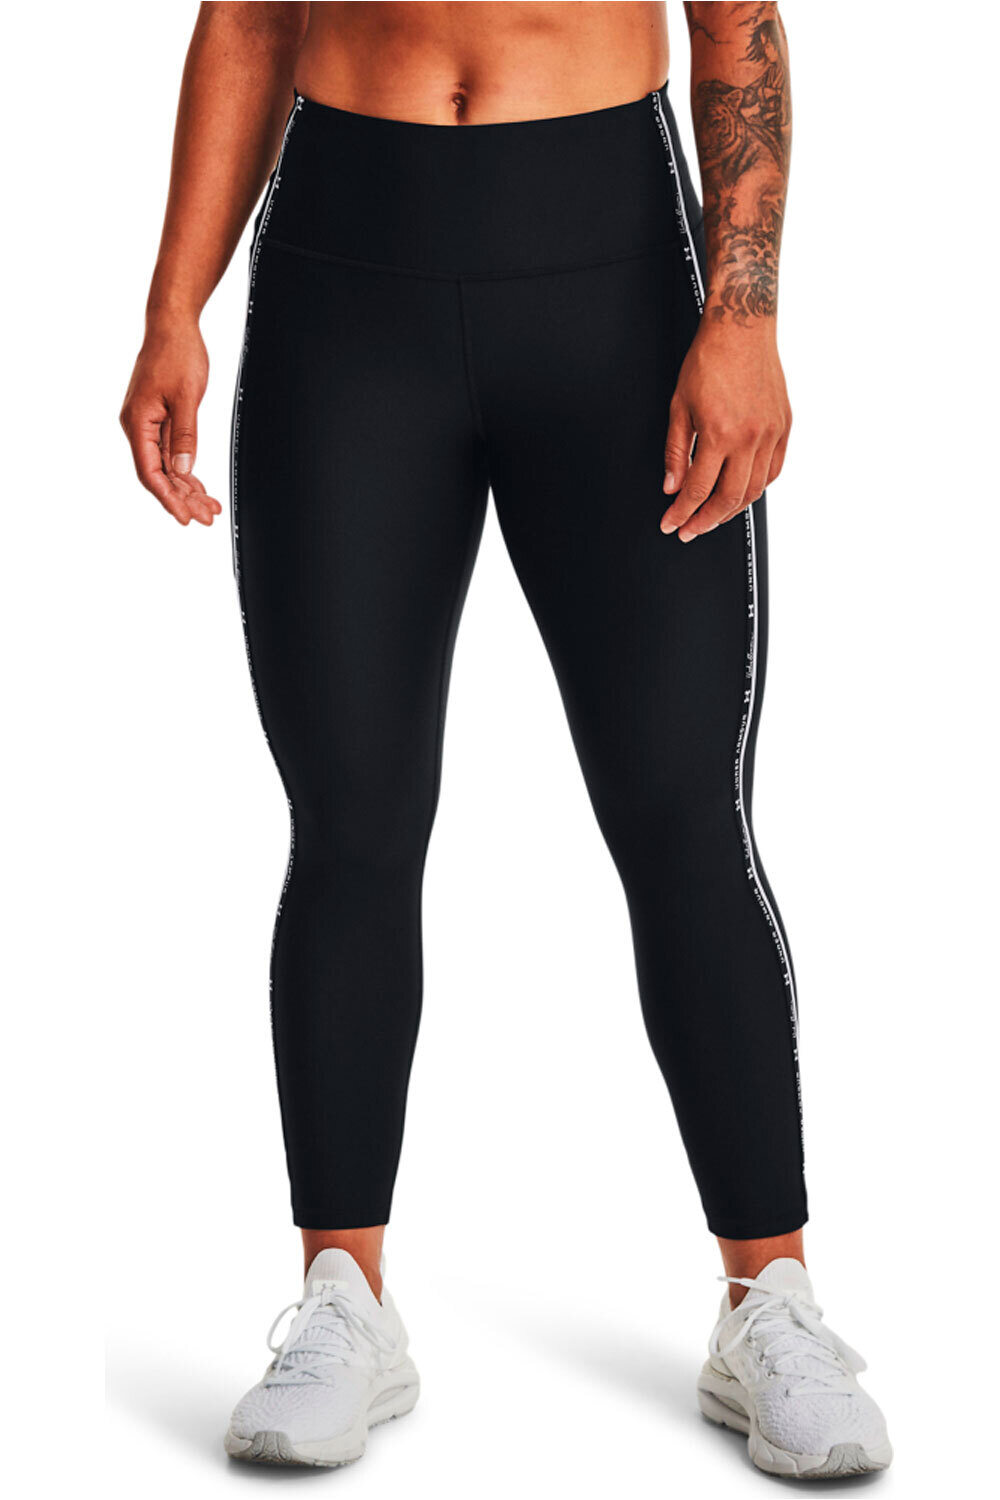 Under Armour pantalones y mallas largas fitness mujer HG Armour Taped Ankle Leg vista frontal